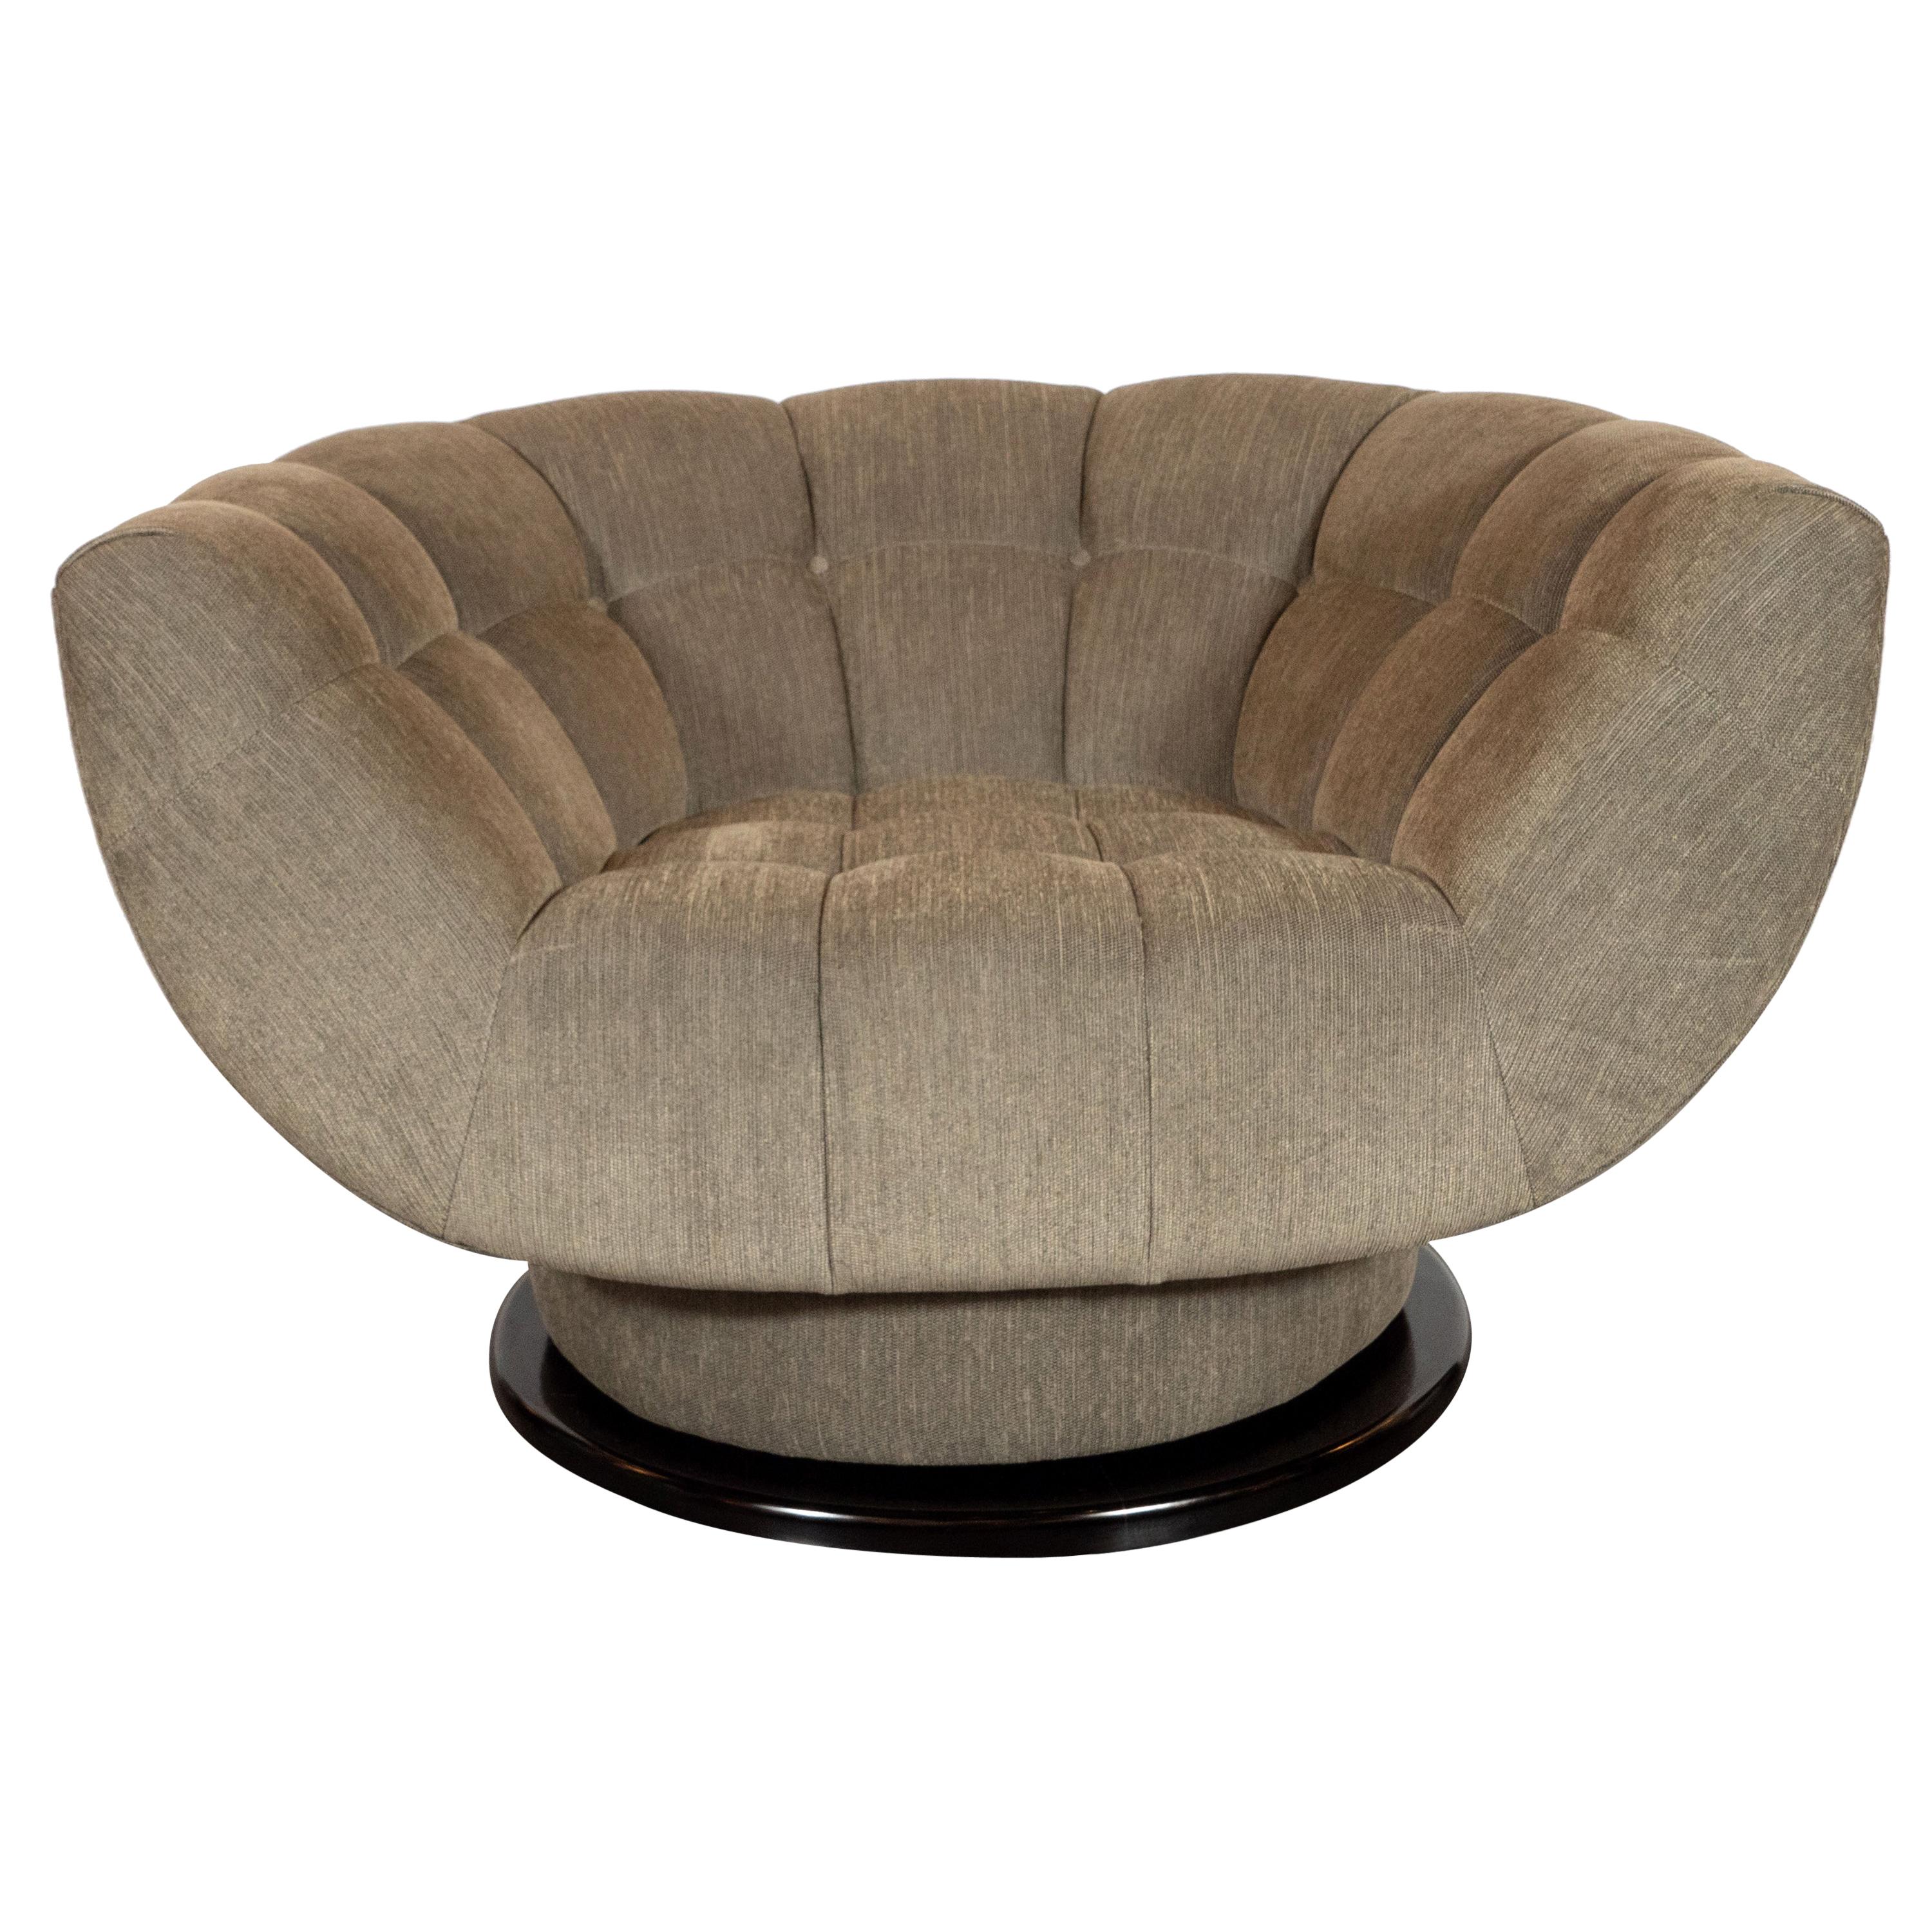 Midcentury Biscuit Tufted Swivel Chair in Smoked Sage Fabric by Adrian Pearsall